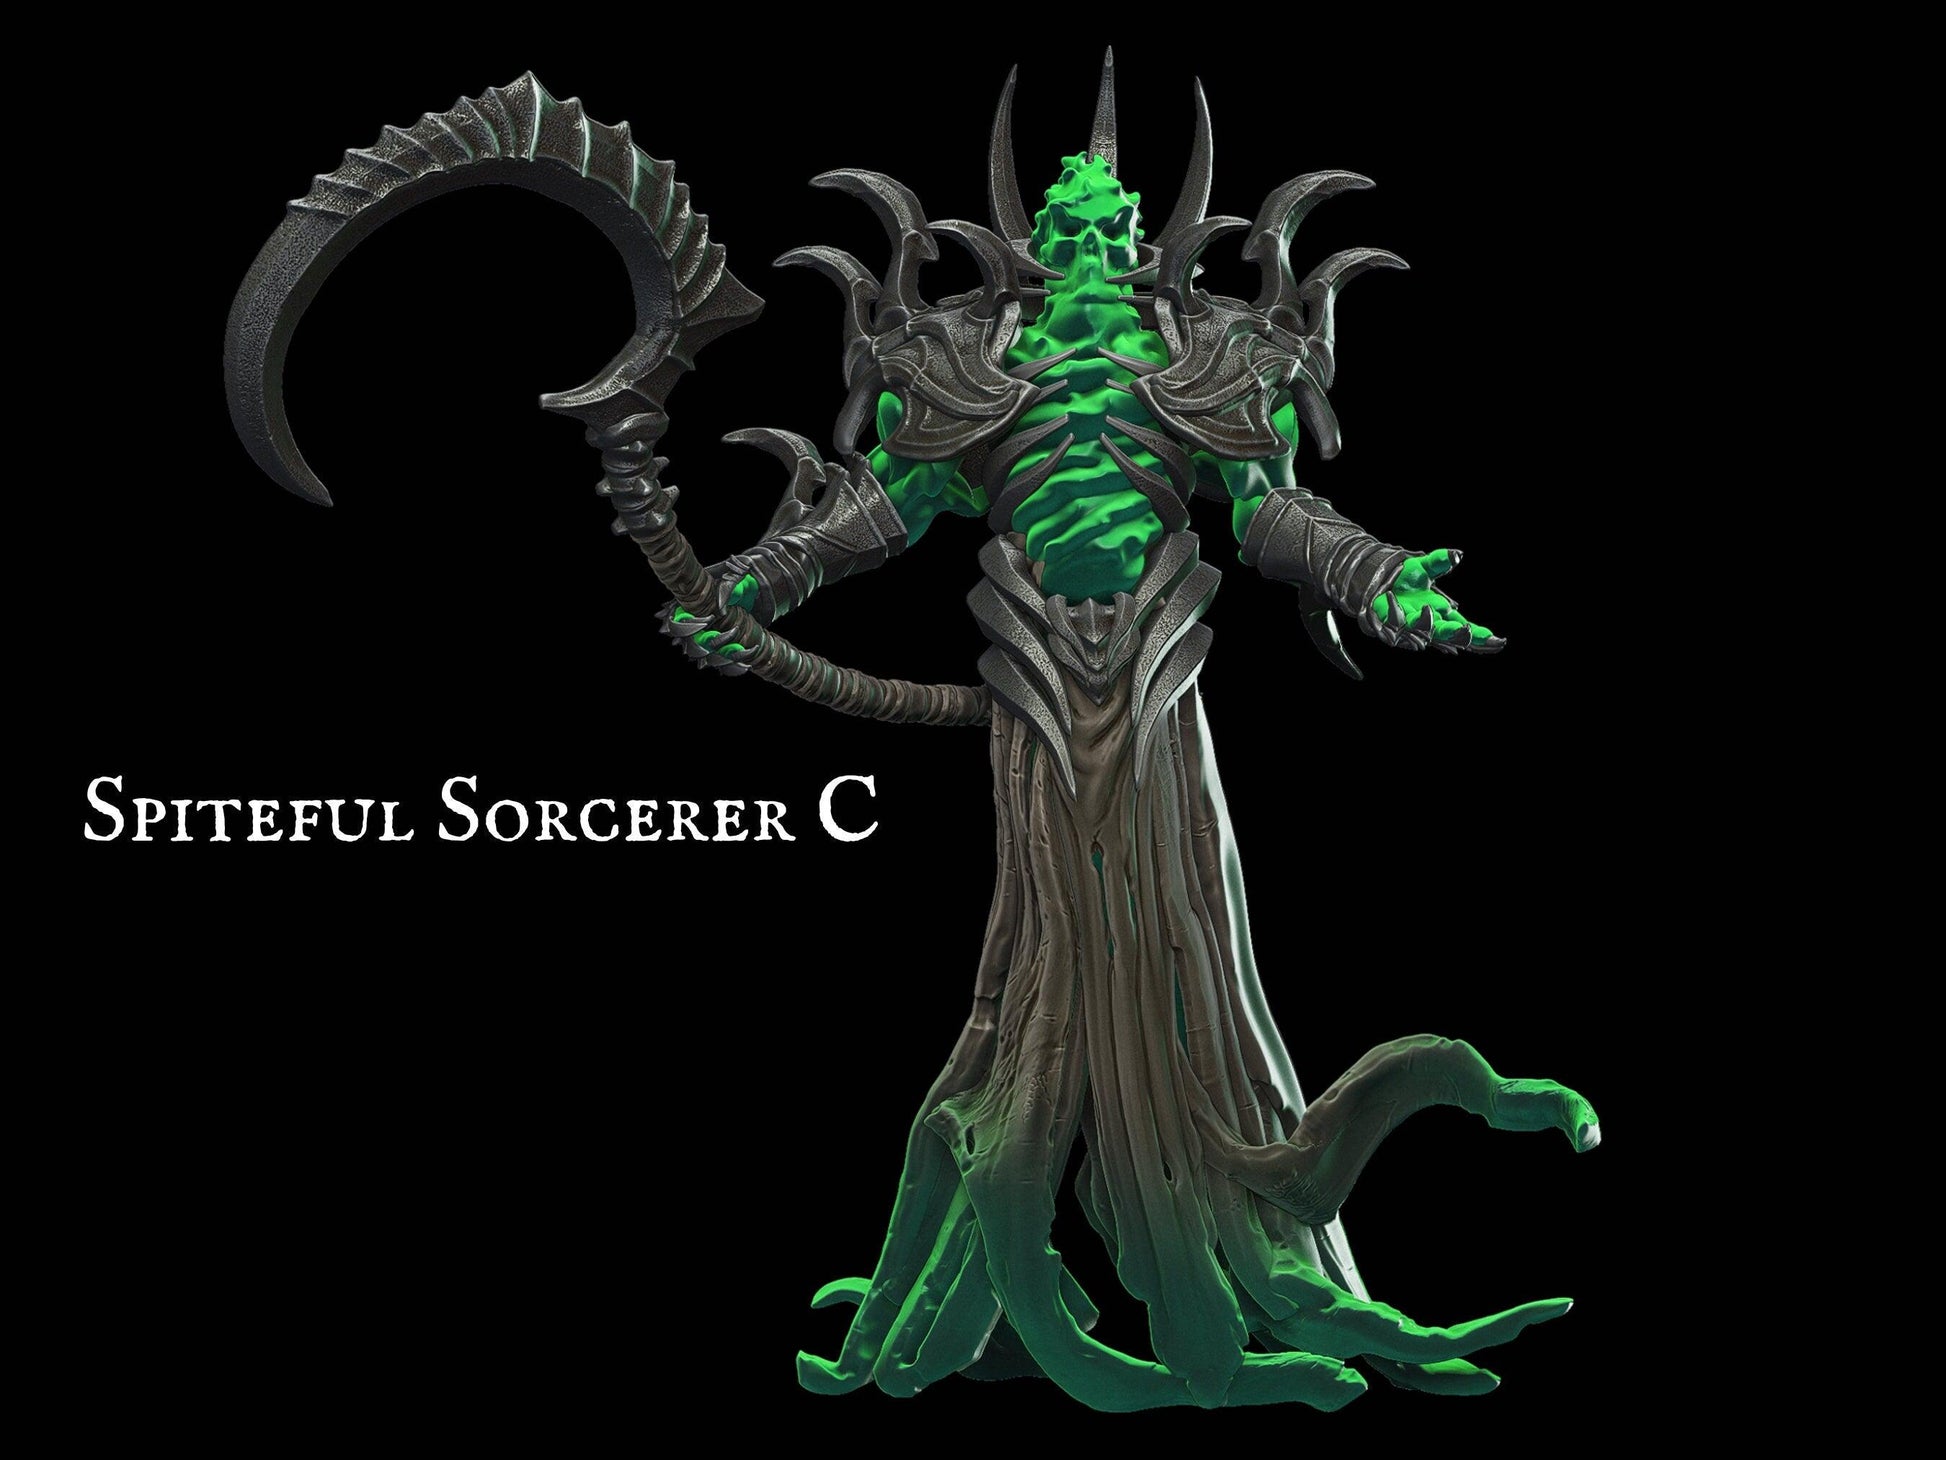 Spiteful Sorcerer Miniature 28mm scale Tabletop gaming DnD Miniature Dungeons and Dragons, dnd 5e dungeon master gift - Plague Miniatures shop for DnD Miniatures